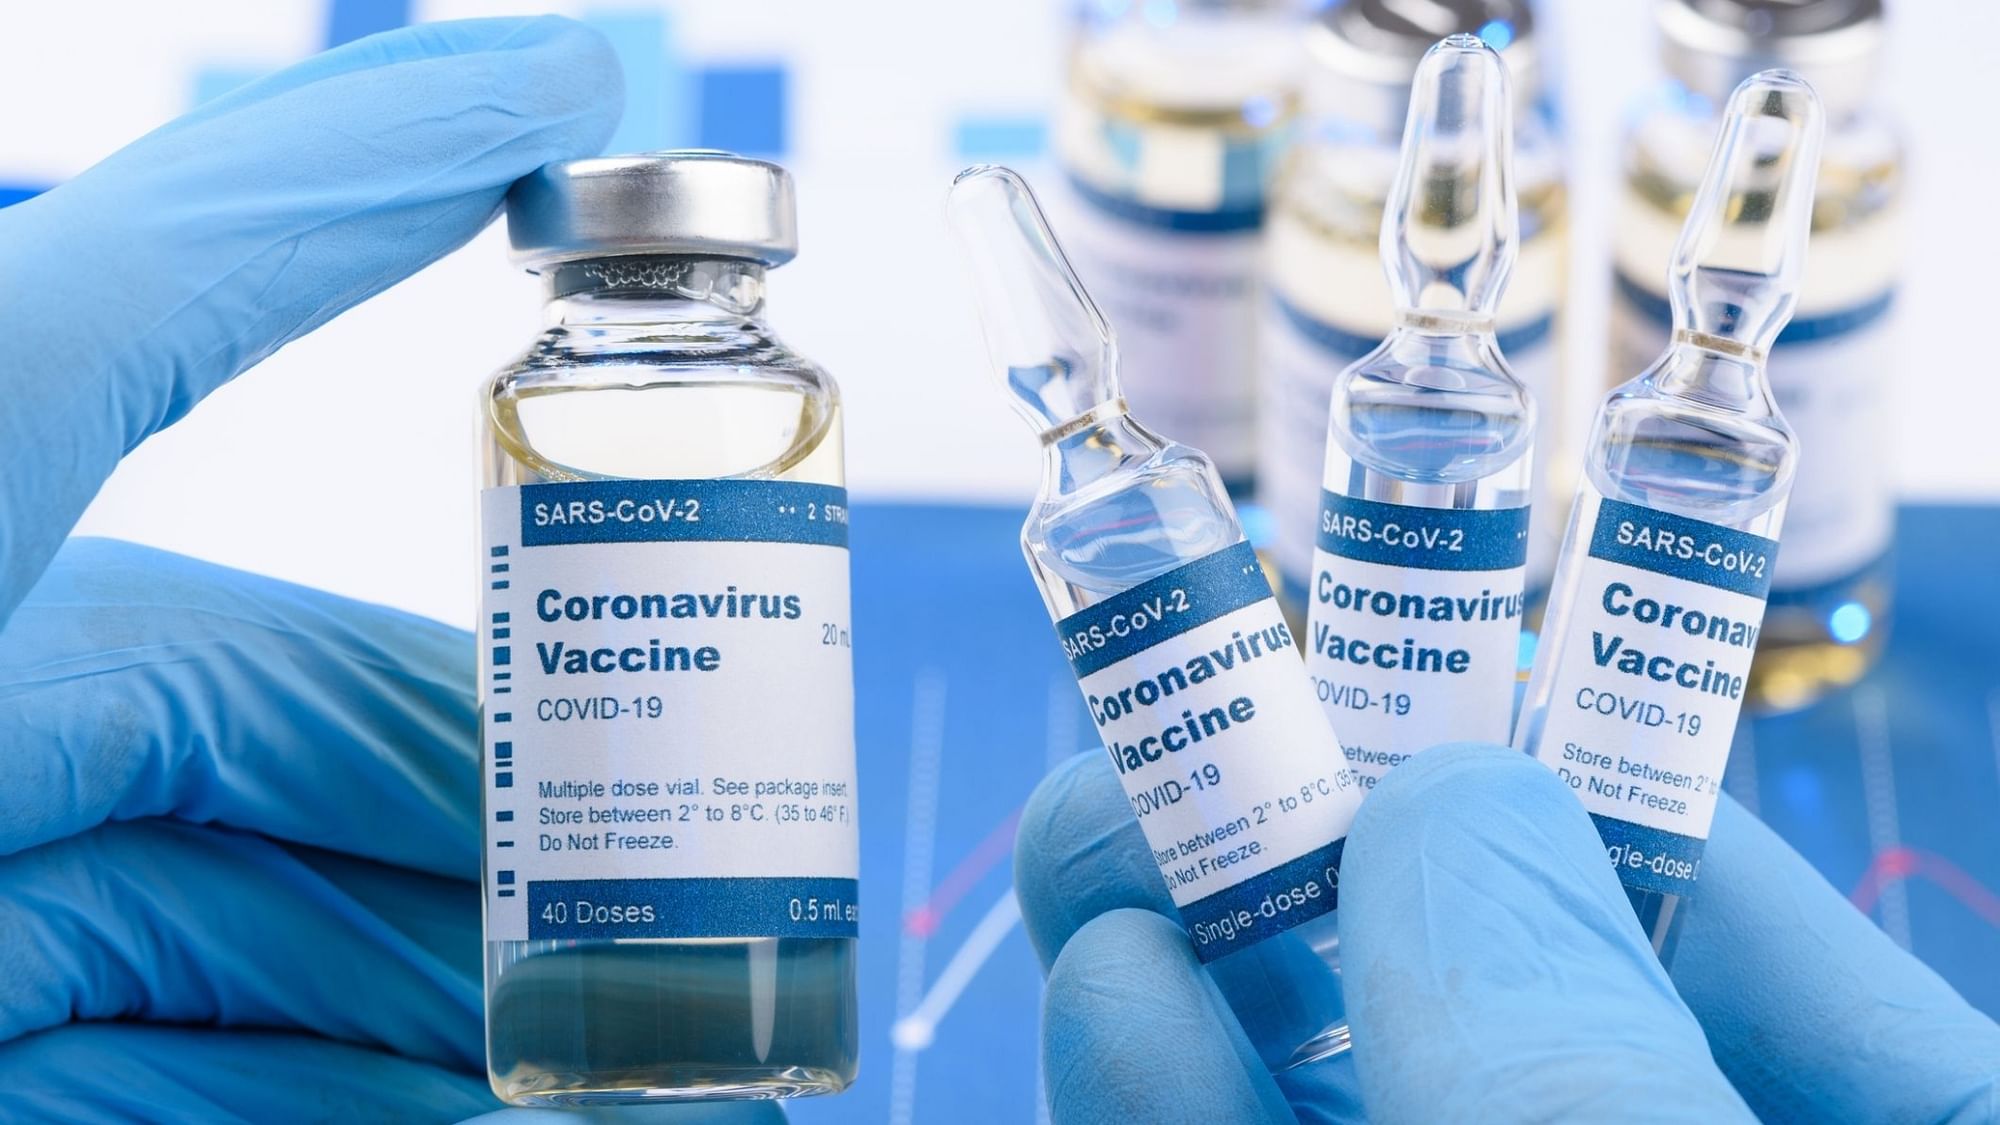 Oxford Vaccine: What do we know about the Oxford-AstraZeneca Vaccine so far? How does it work? Find out here.